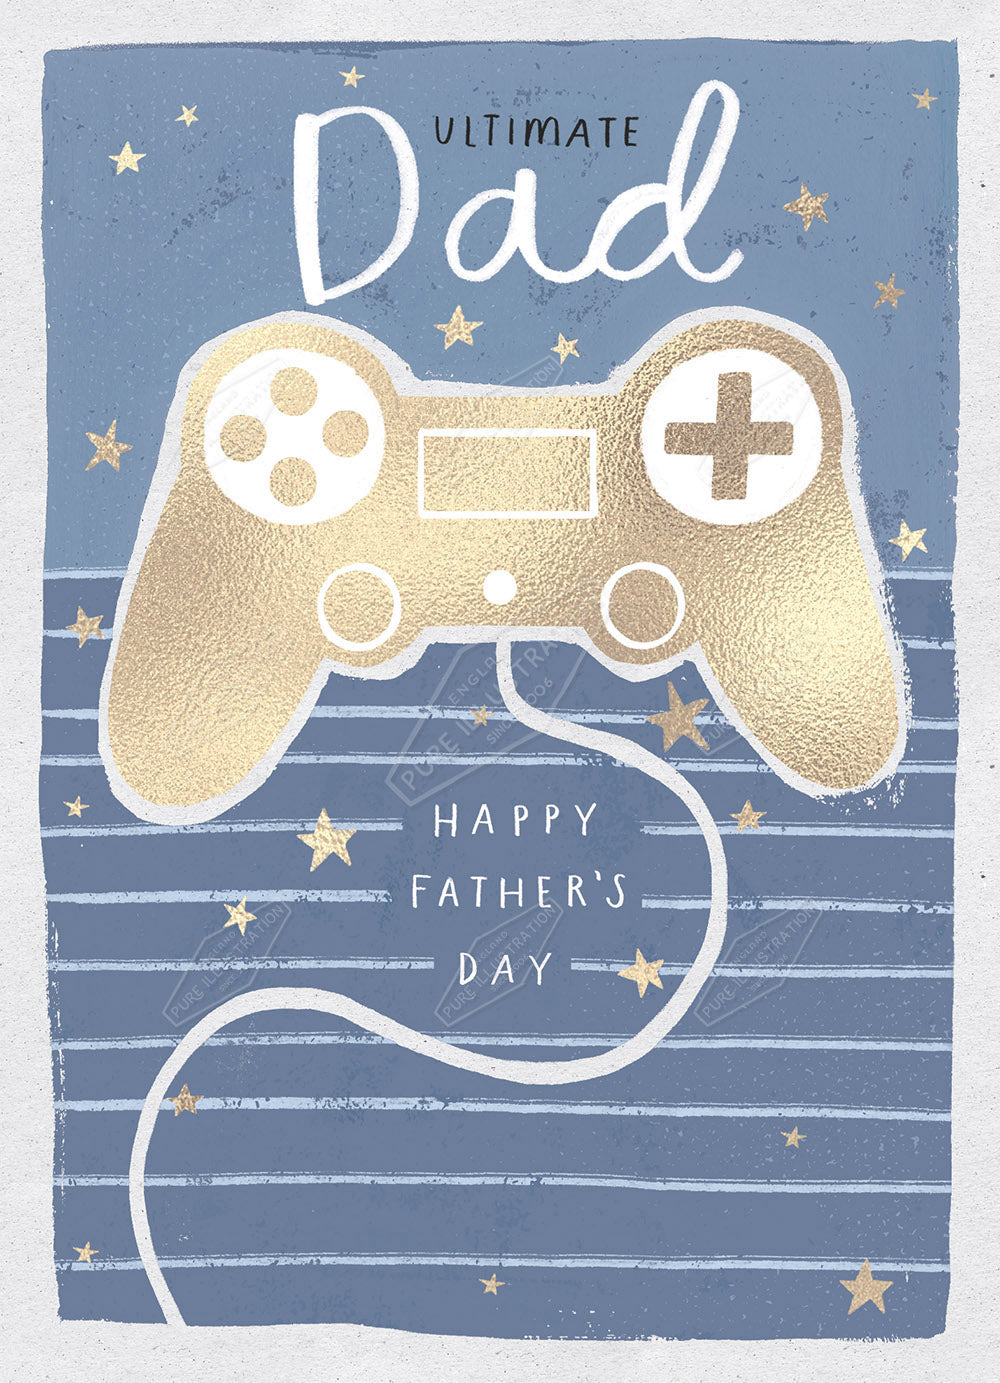 00034552KSP- Kerry Spurling is represented by Pure Art Licensing Agency - Father's Day Greeting Card Design